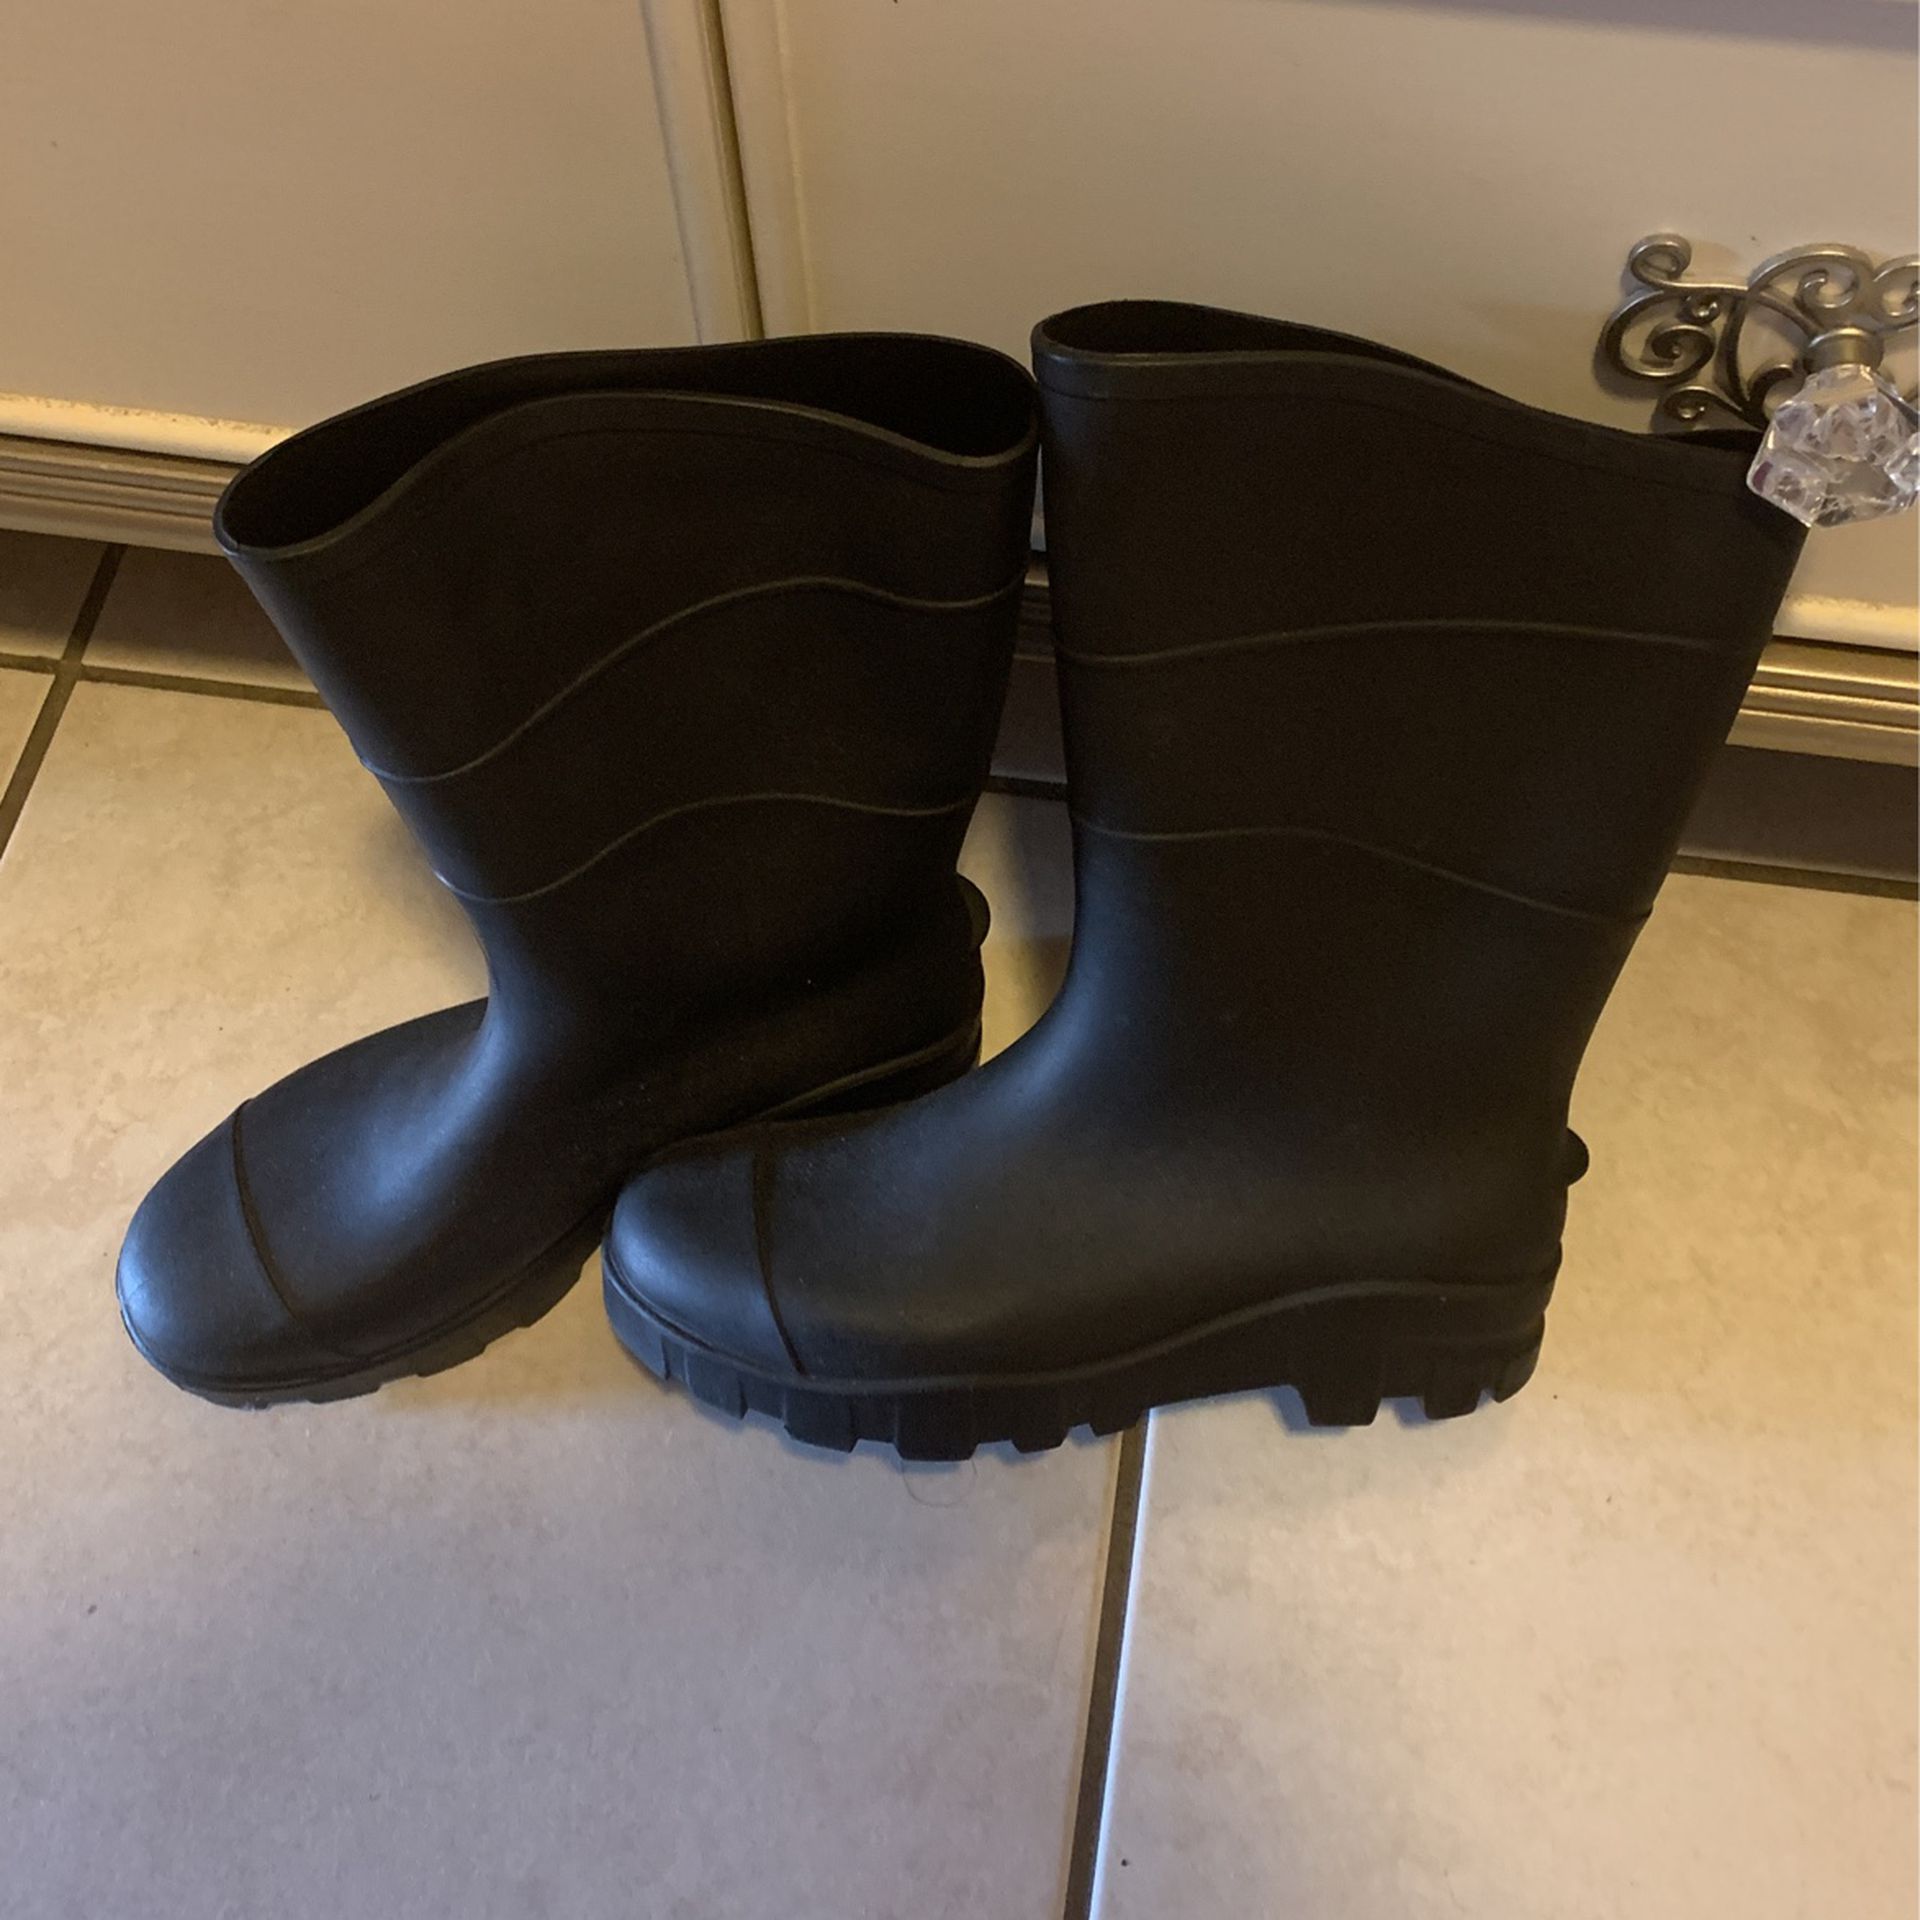 General Purpose Rubber Boots